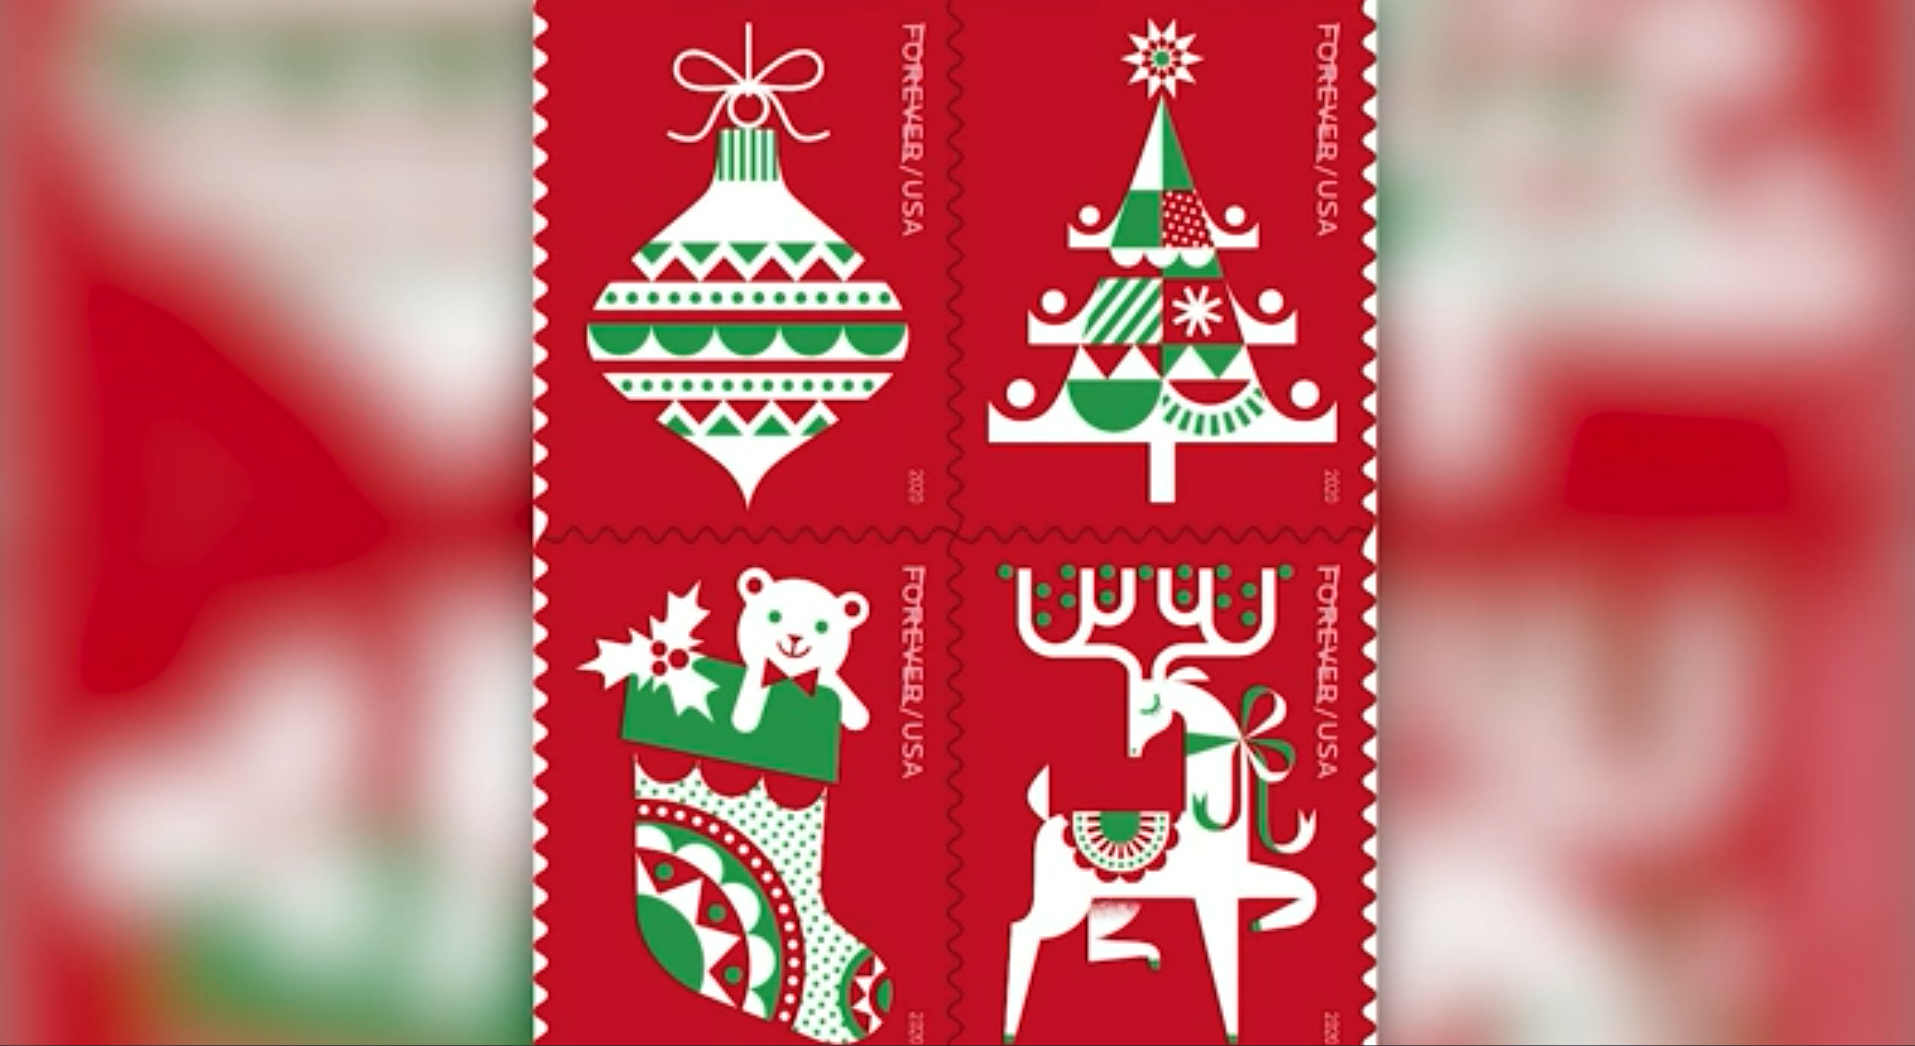 USPS announces 2020 Holiday stamps